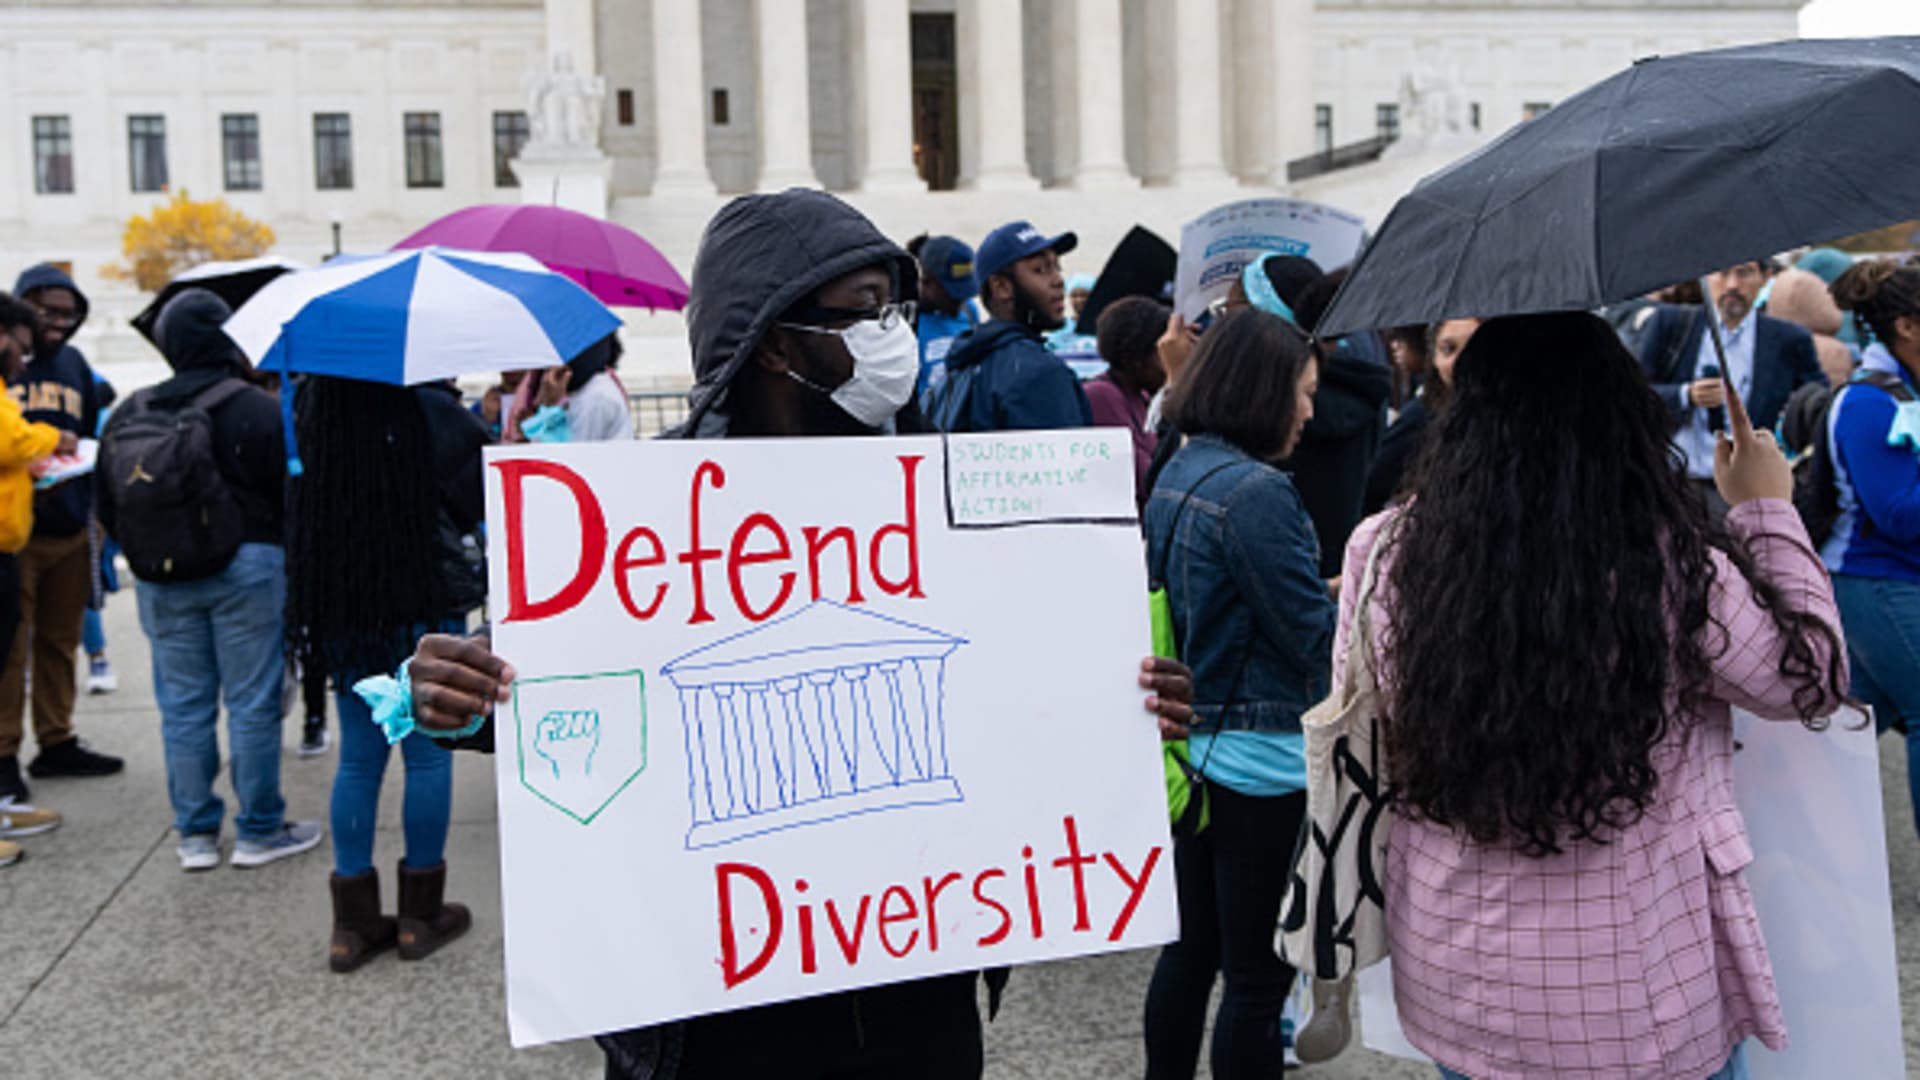 Protesters gather in front of the U.S. Supreme Court as affirmative action cases involving Harvard and University of North Carolina admissions are heard by the court in Washington on Monday, October 31, 2022.